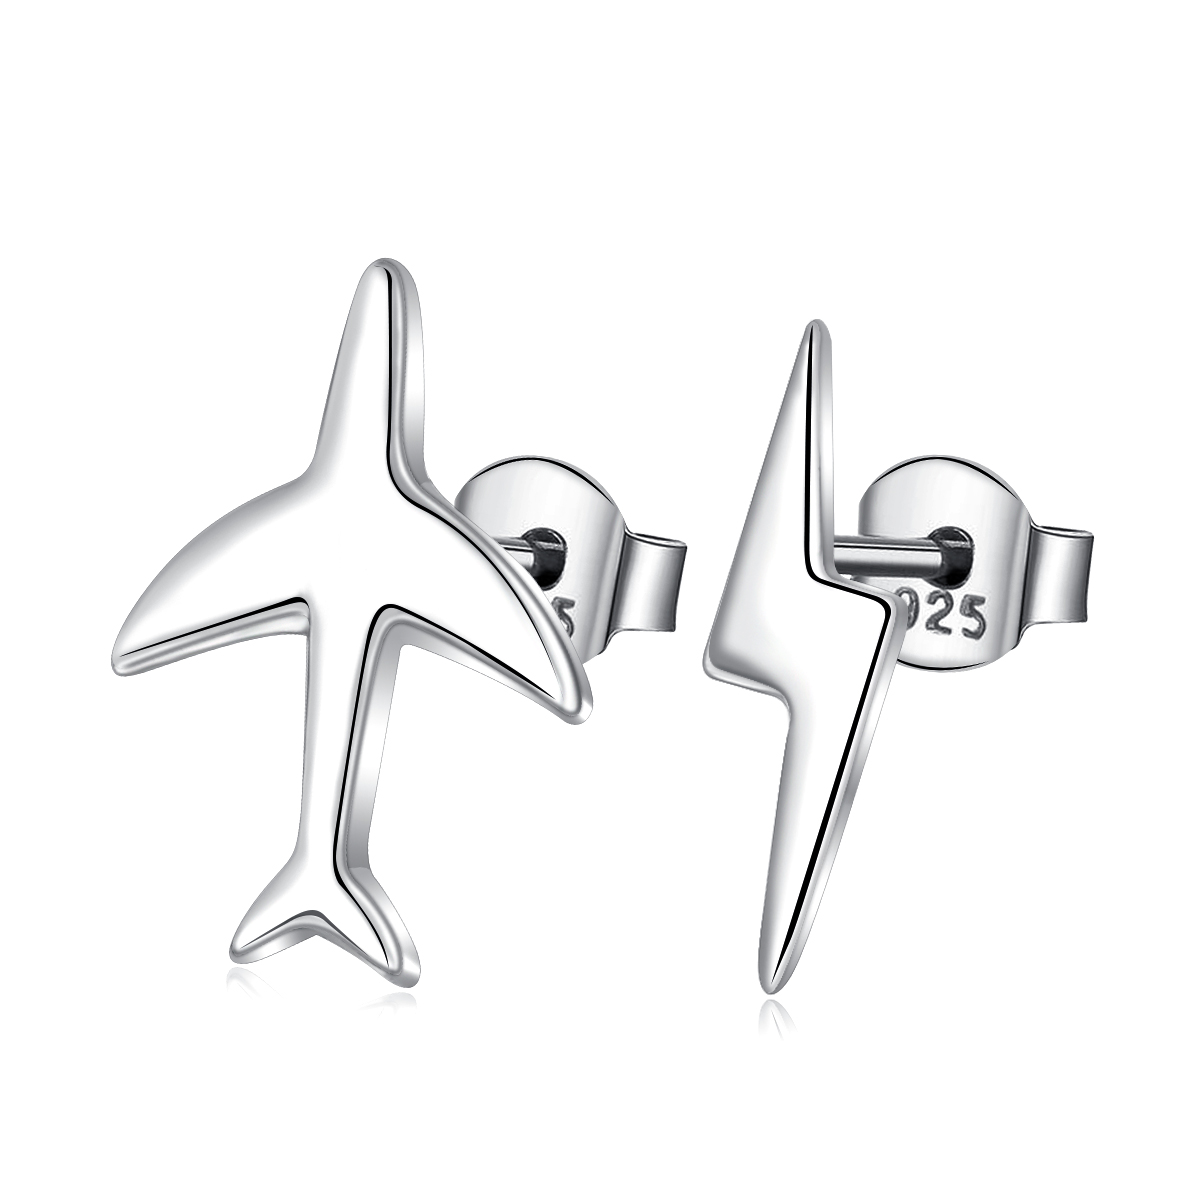 Merryshine Jewelry S925 Sterling Silver Airplanes And Lightning Small Stud Earrings For Girls